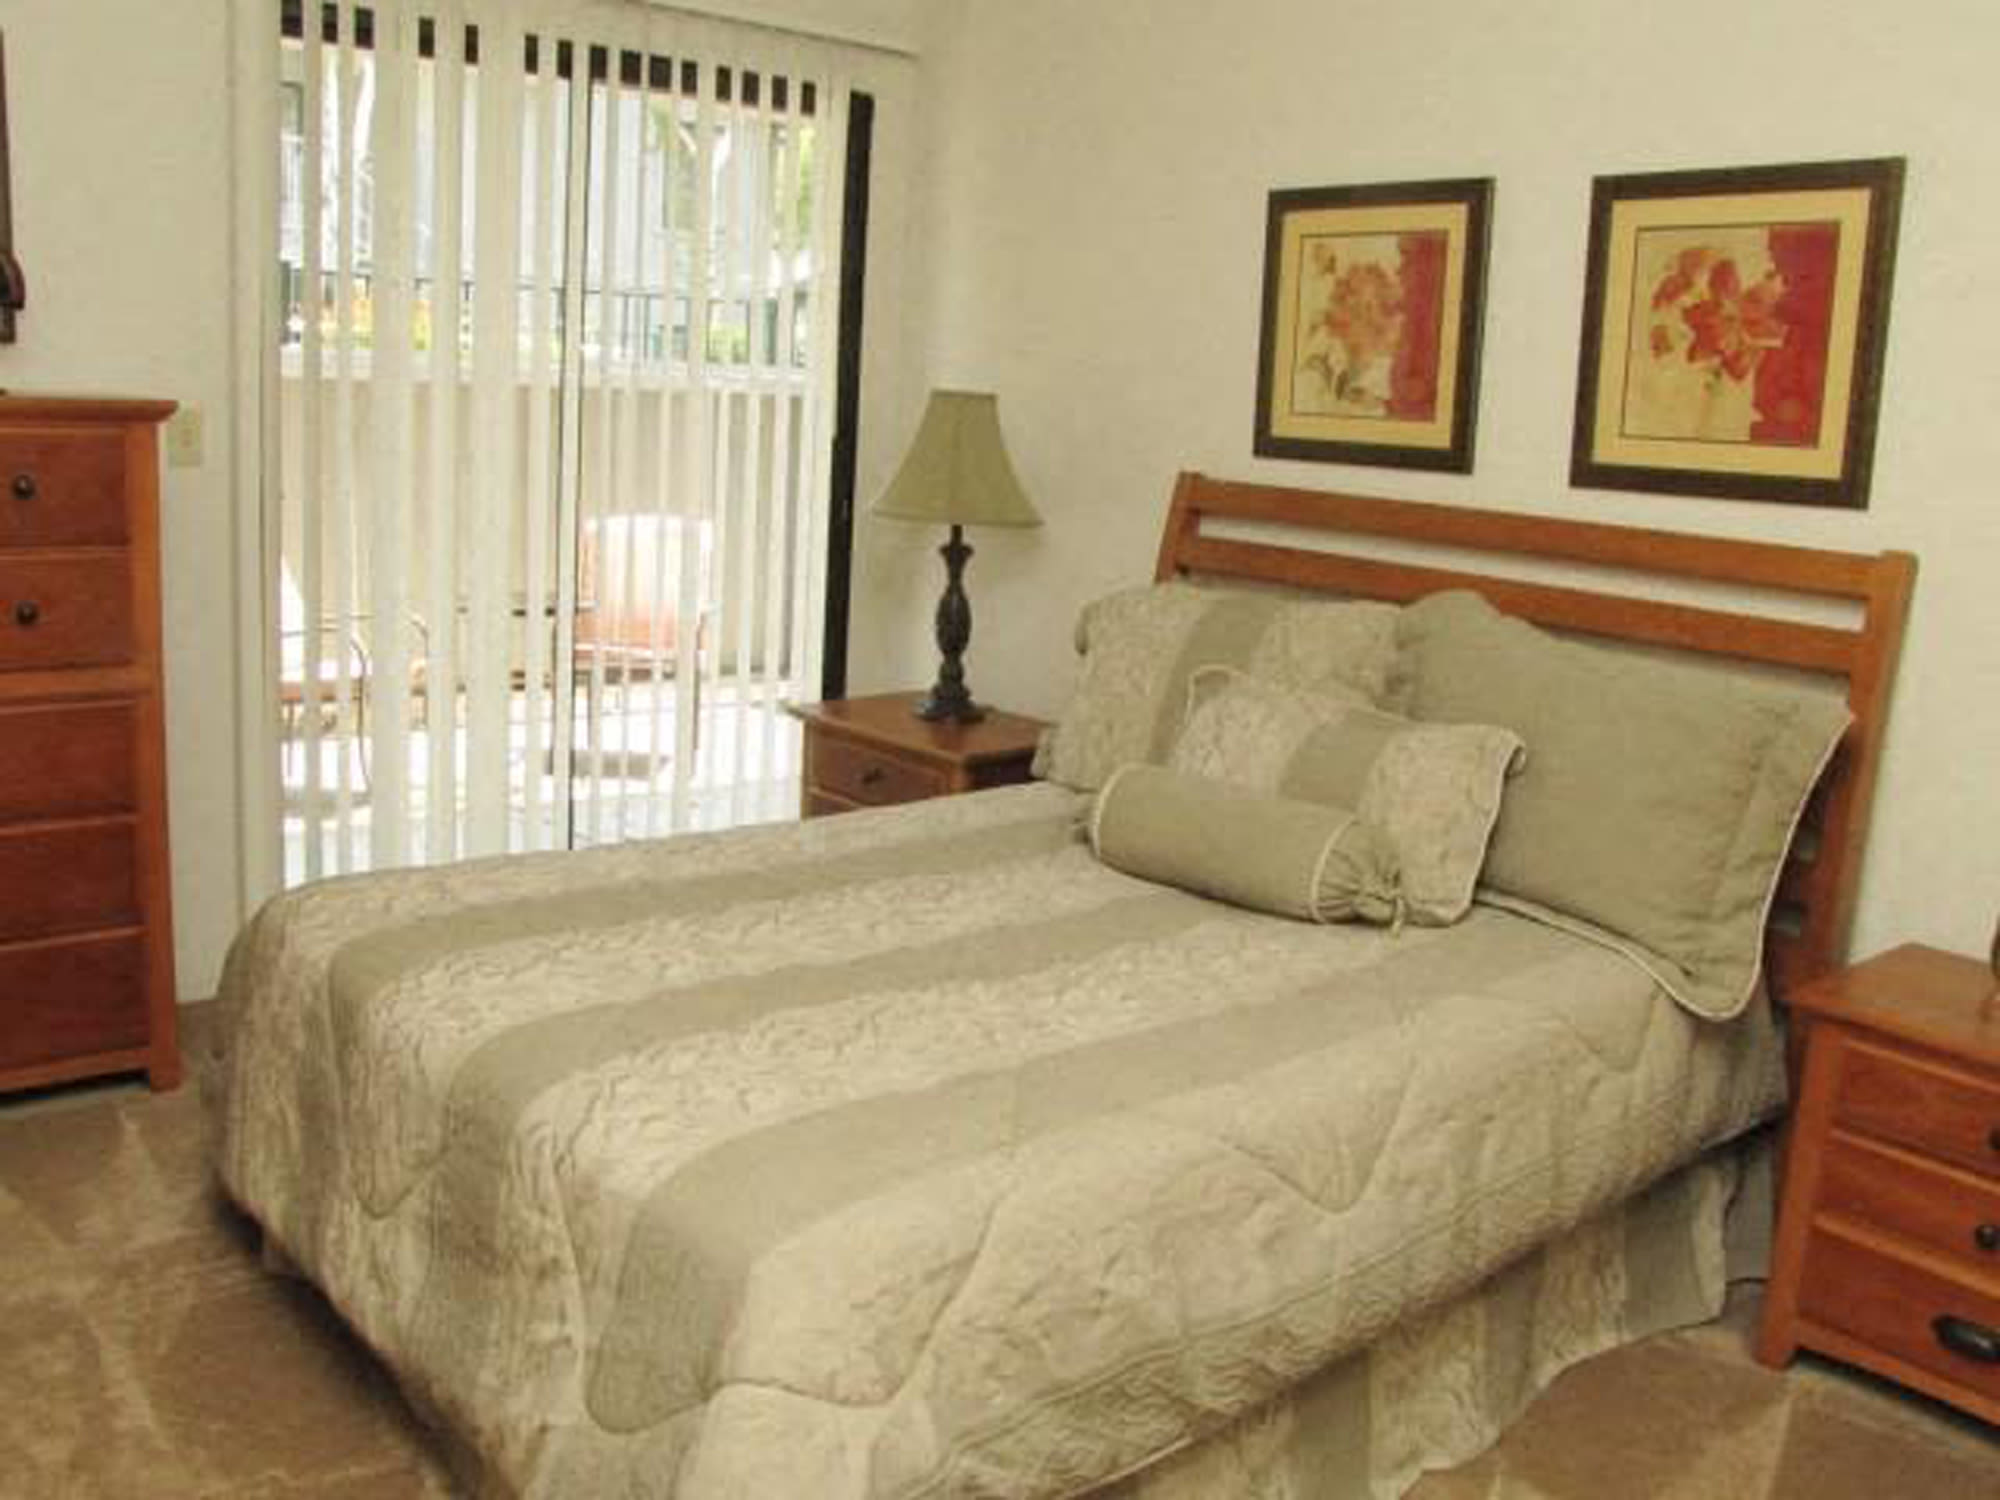 Comfortable bed and bedroom at Park Place in Manteca, California